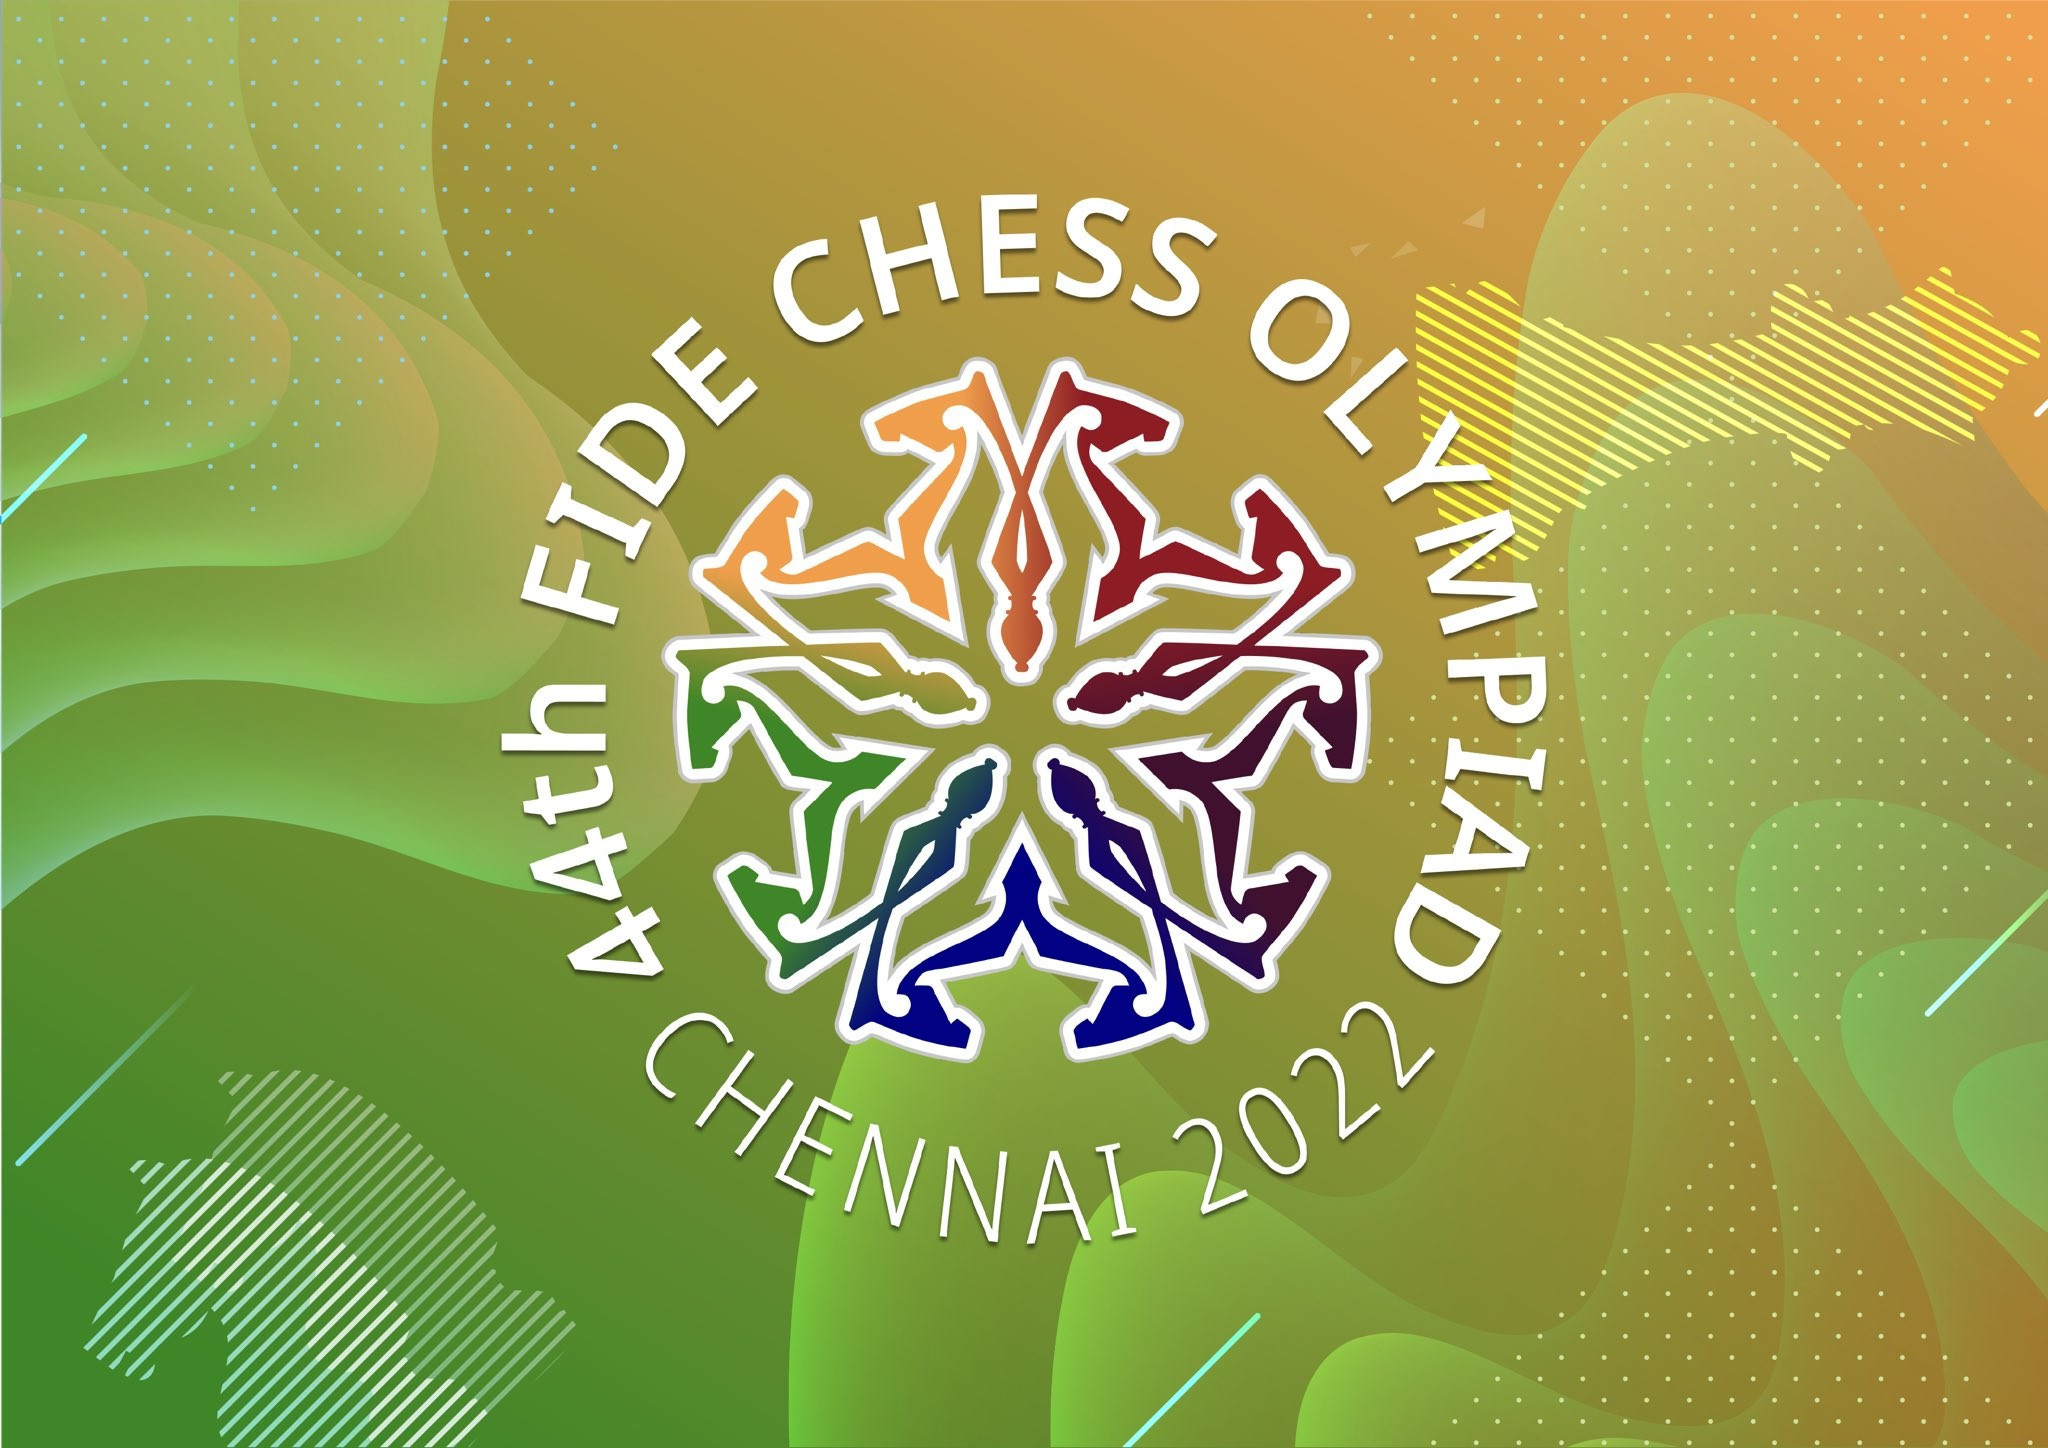 A total of 185 countries have registered to participate at the FIDE Chess Olympiad ©FIDE